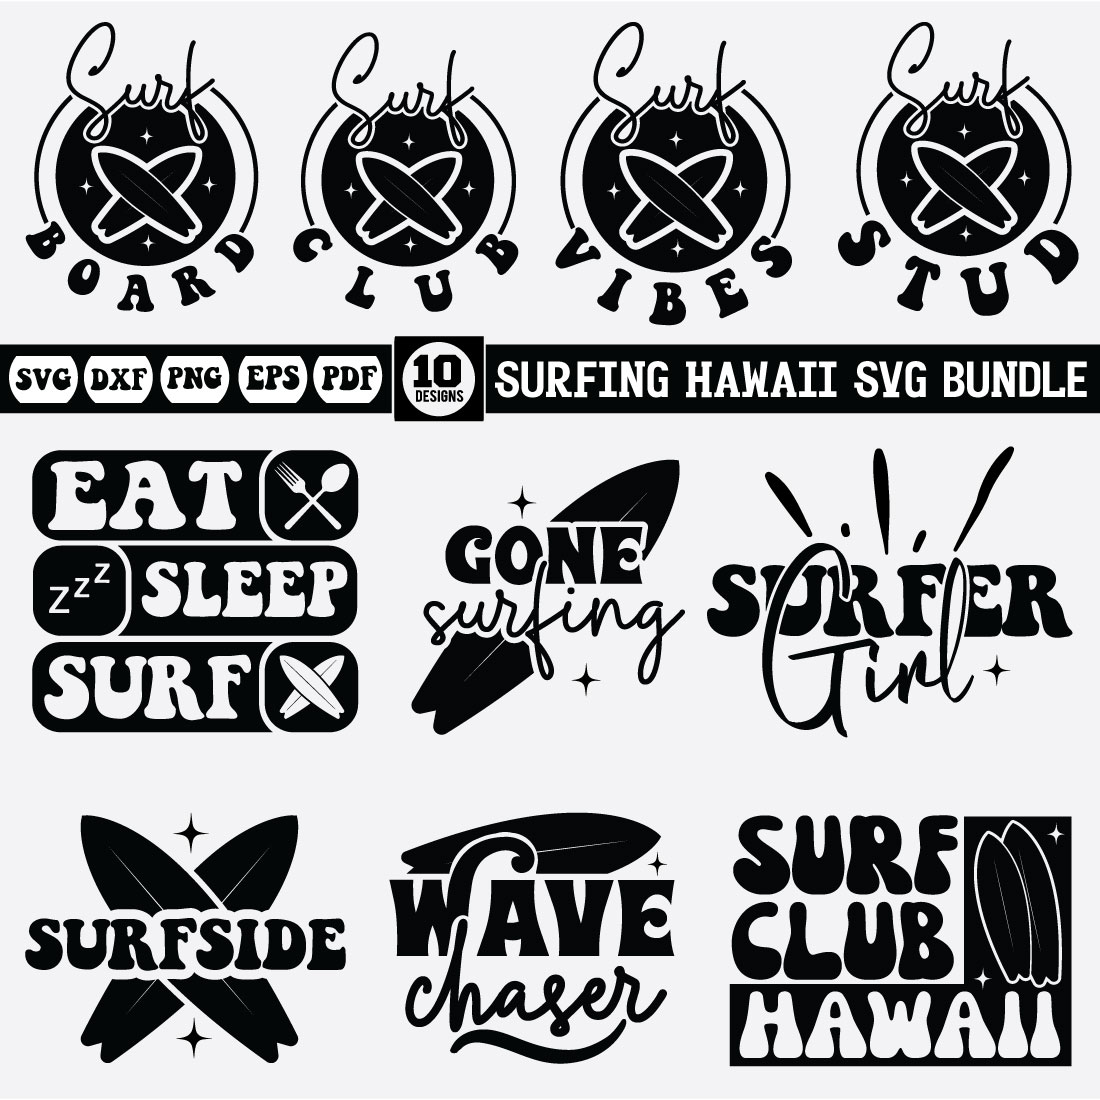 Surfing Hawaii Svg bundle preview image.